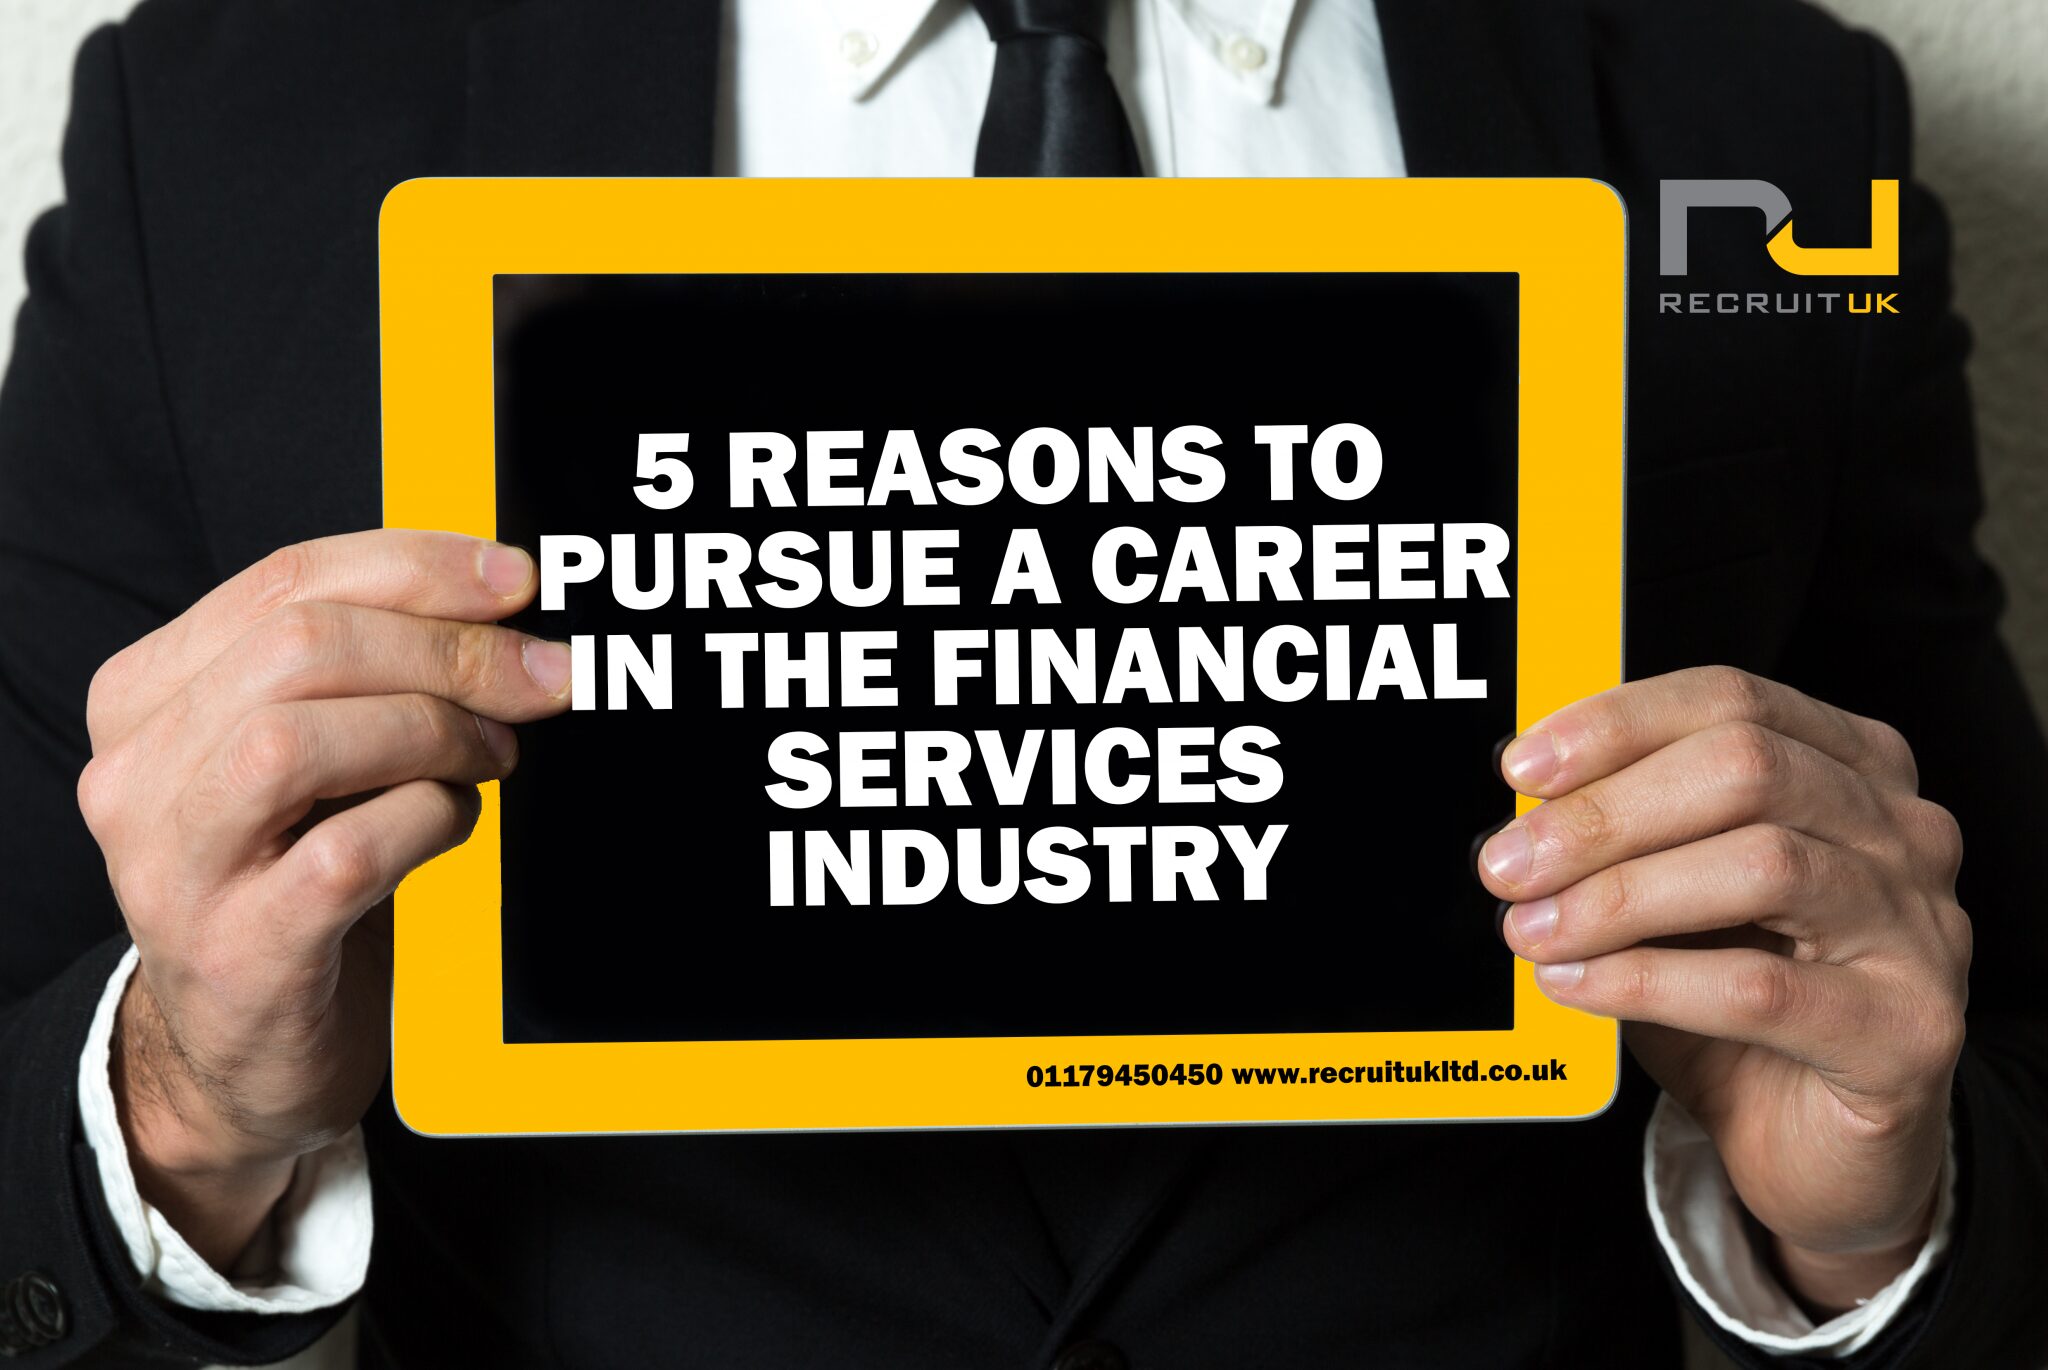 A man holding up a piece of paper stating ' 5 Reasons to pursue a career in the financial services industry'